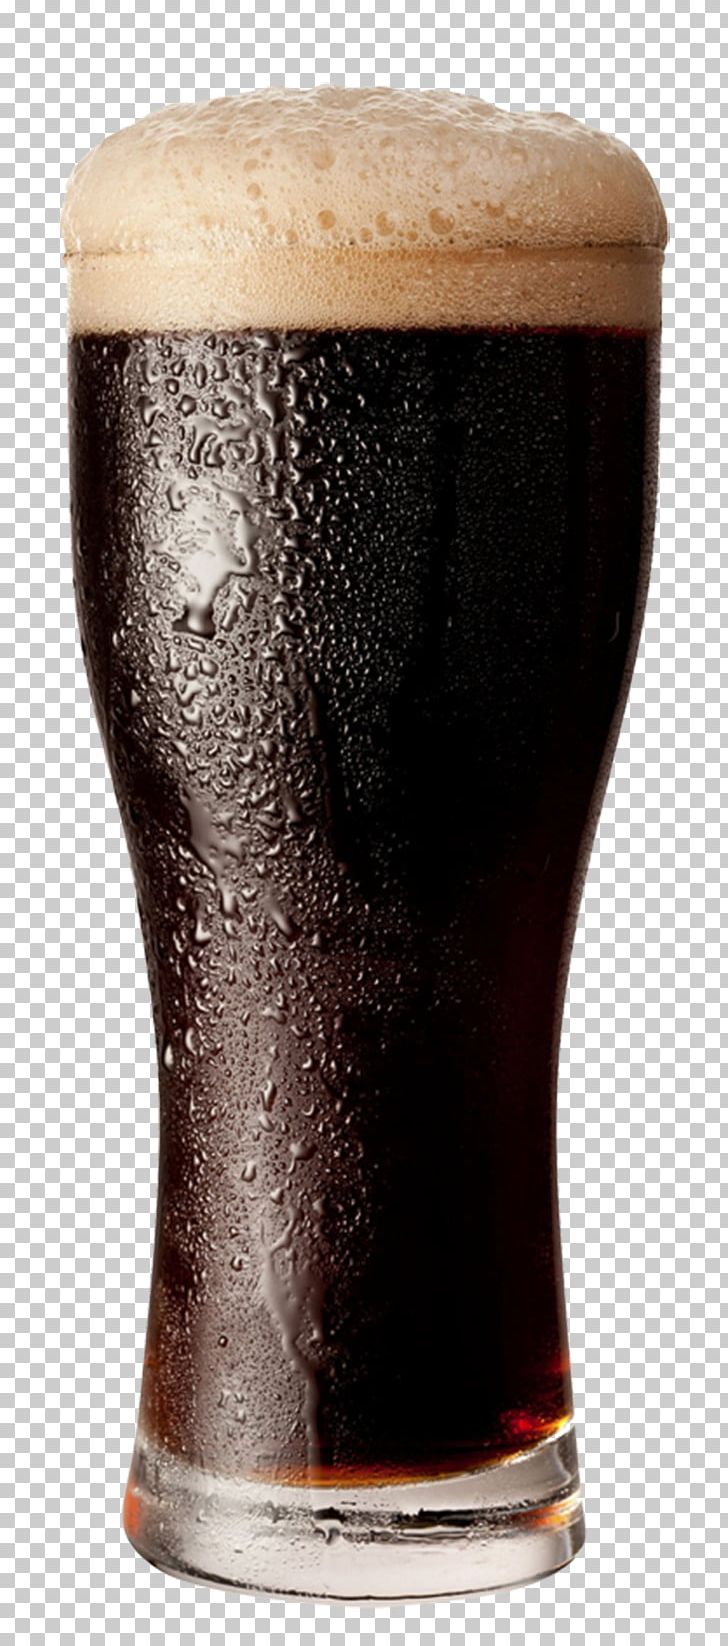 Russian Imperial Stout Beer Porter India Pale Ale PNG, Clipart, Ale, Beer, Beer Brewing Grains Malts, Beer Cocktail, Beer Glass Free PNG Download